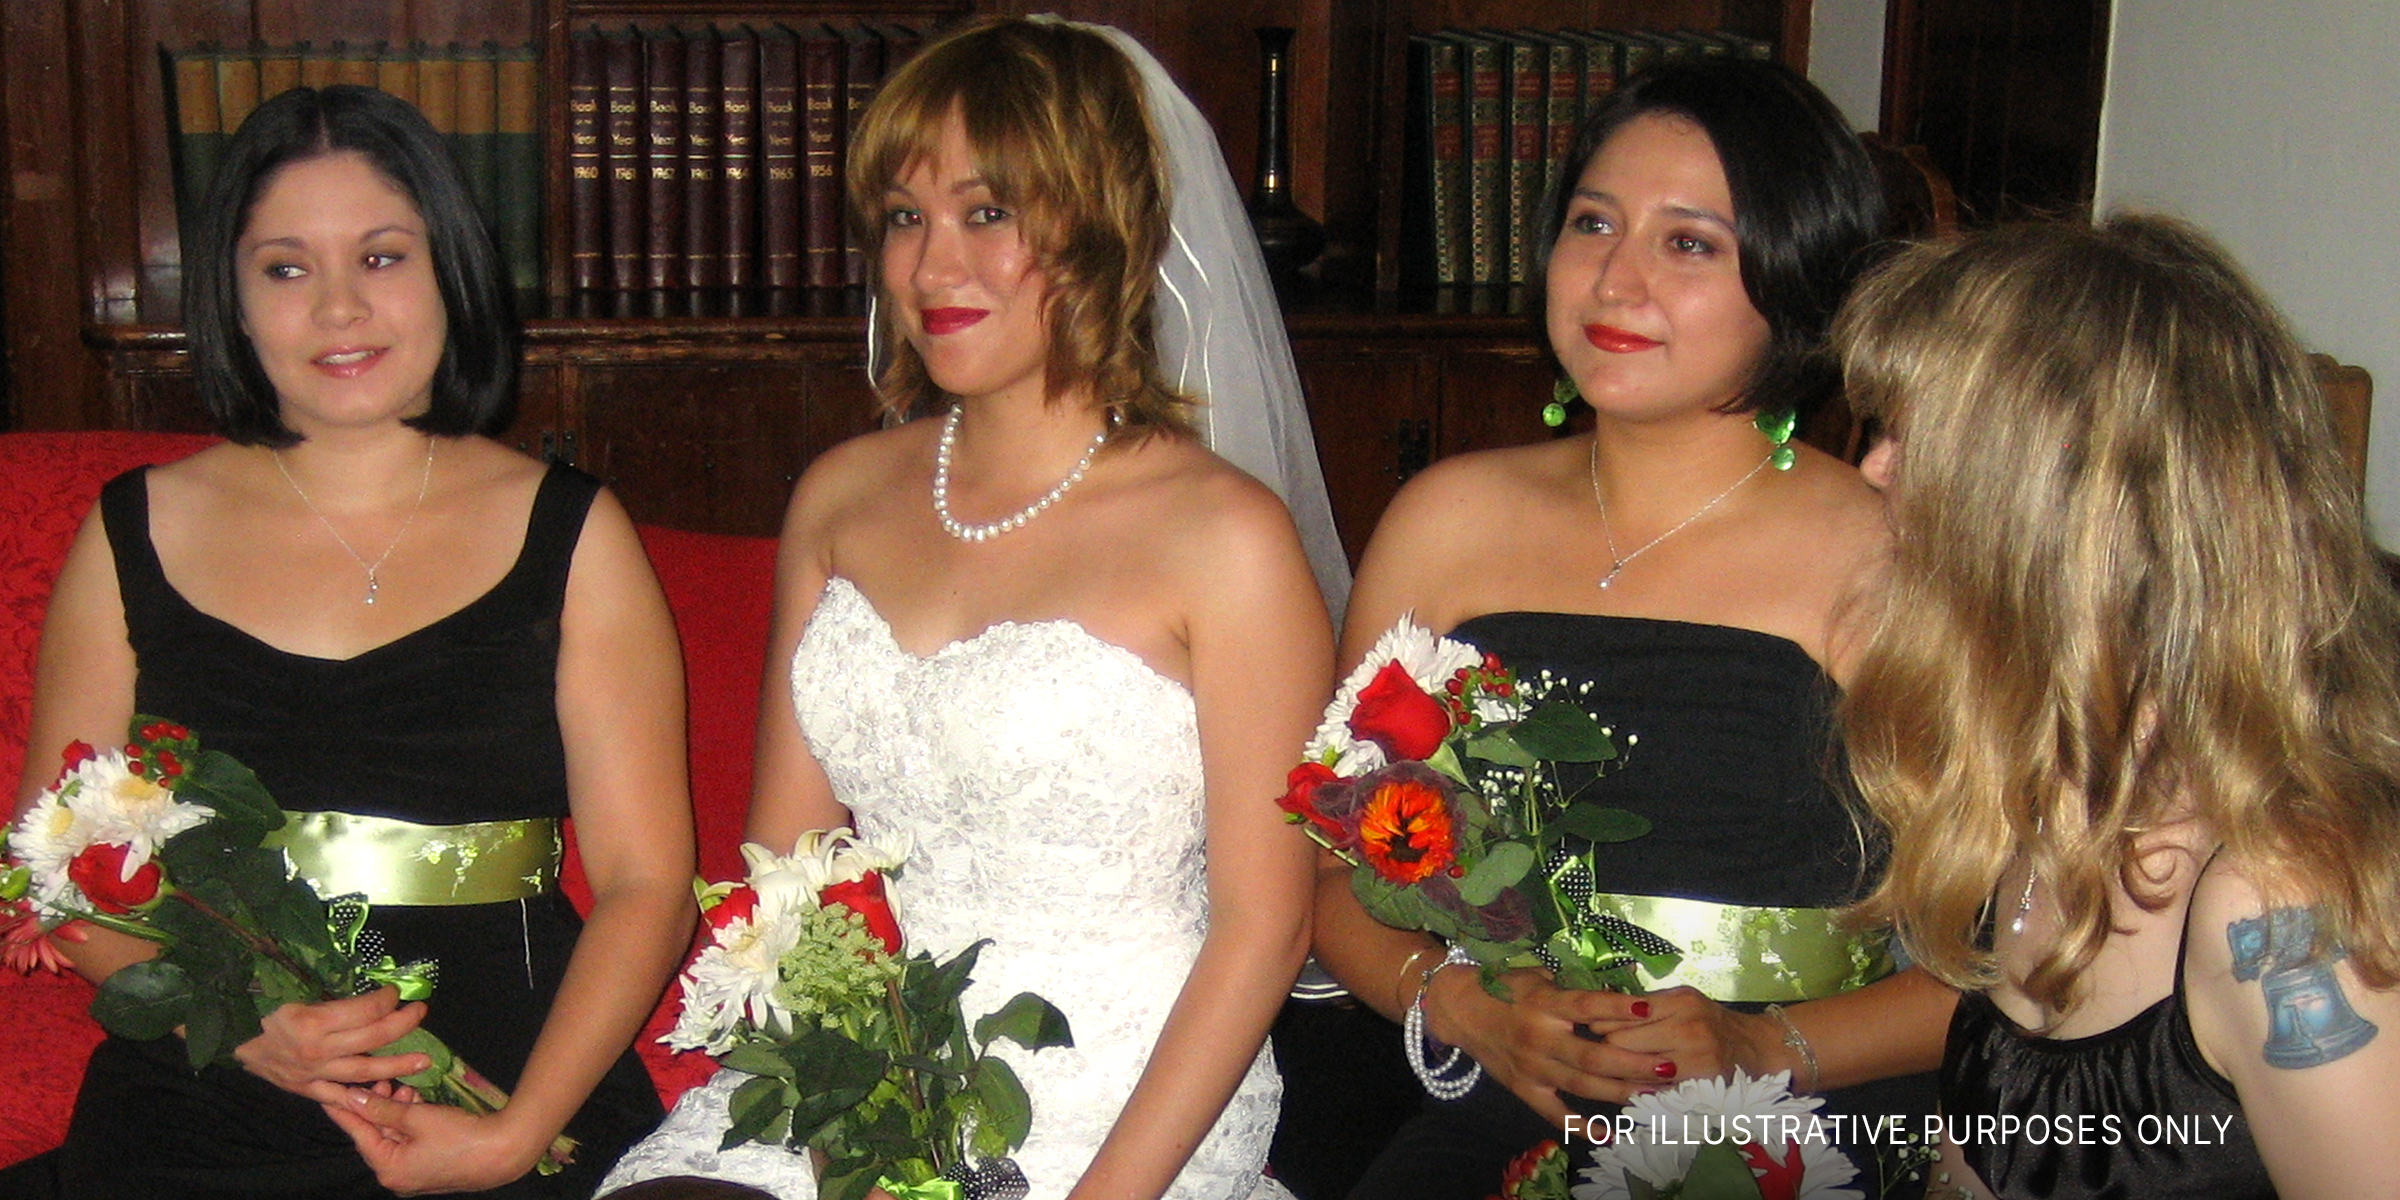 A bride and her bridemaids. | Source: flickr.com/CC BY-SA 2.0/schnaars